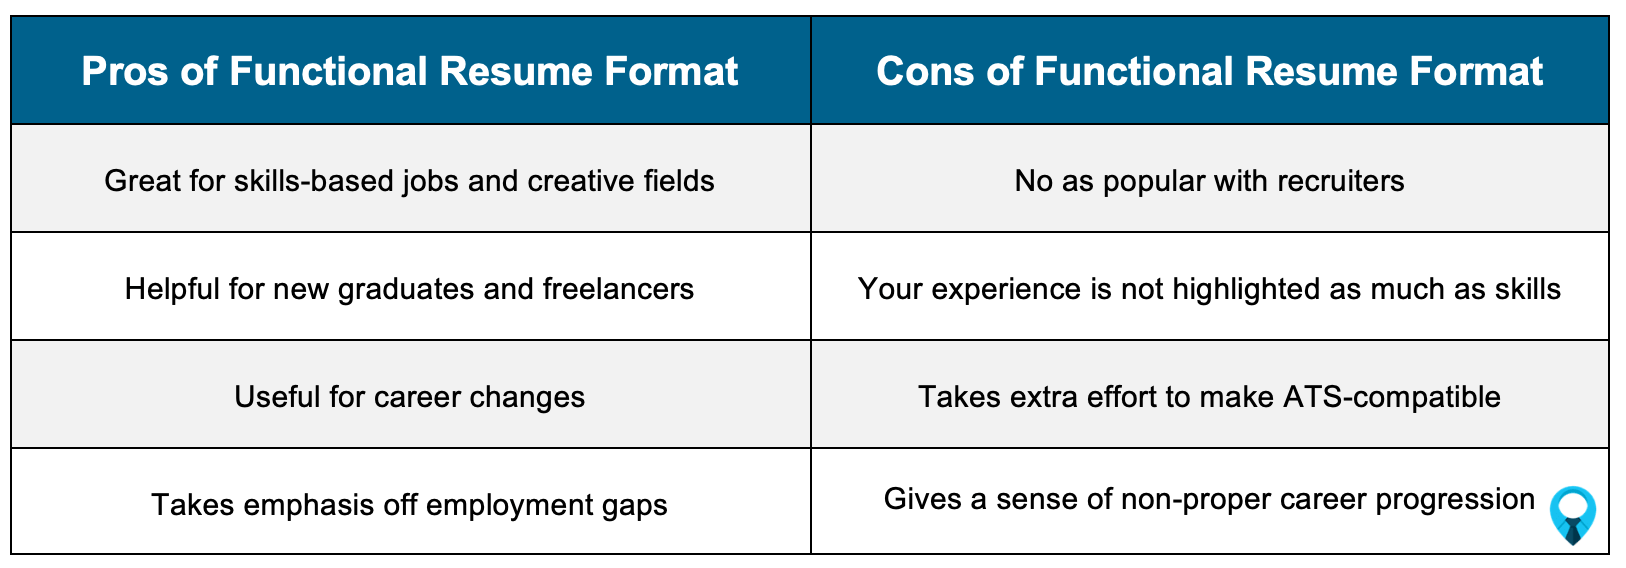 Functional Resume Pros vs Cons